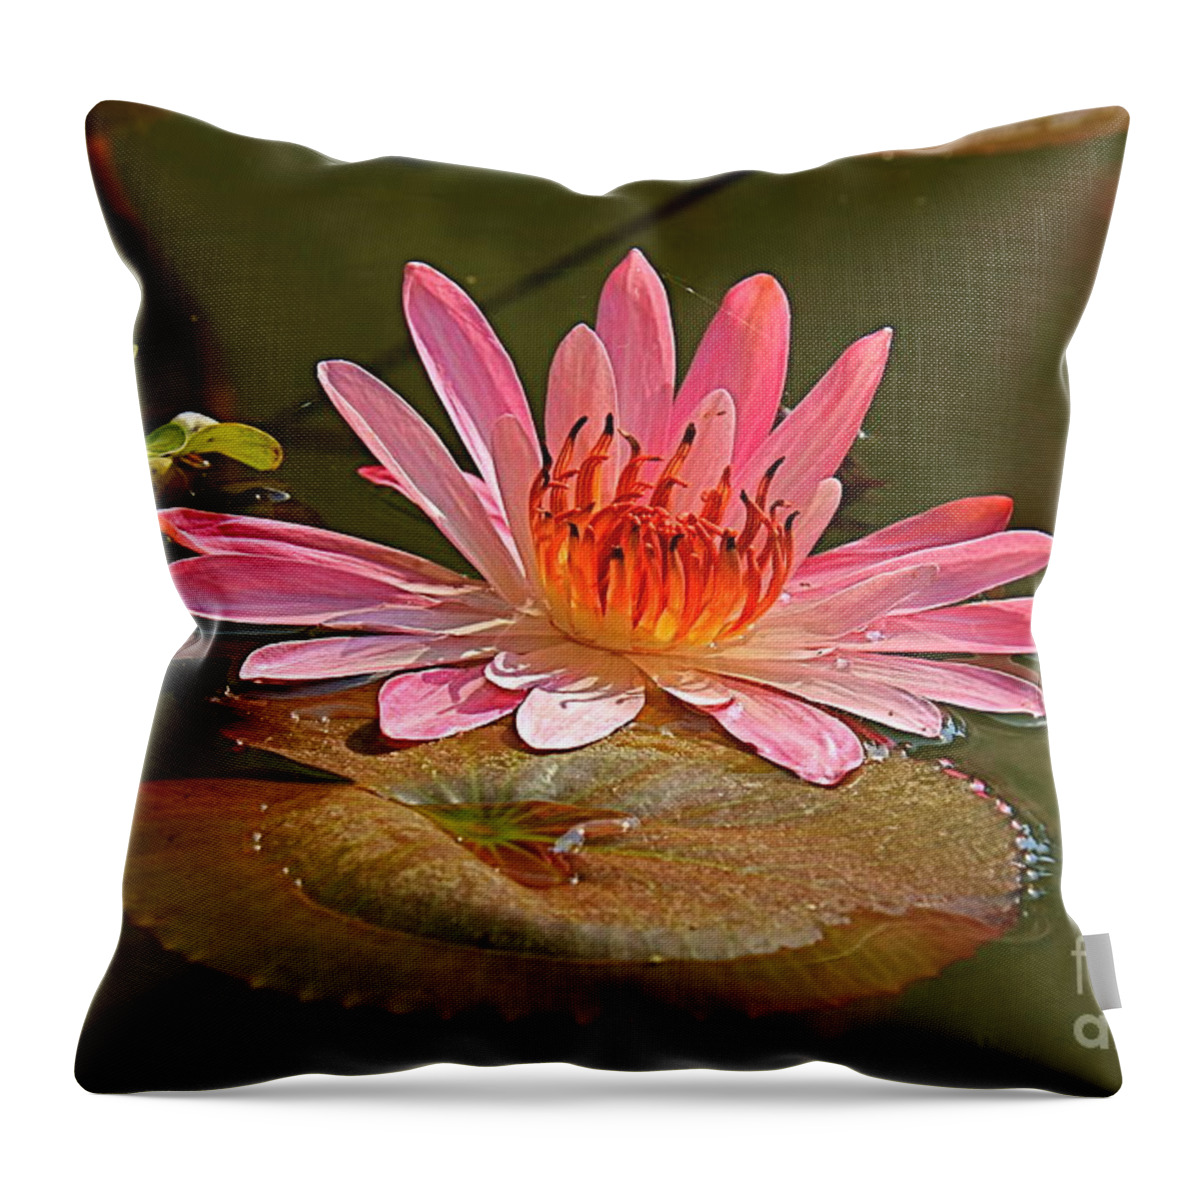 Water Throw Pillow featuring the photograph Water Lily by Nicola Fiscarelli